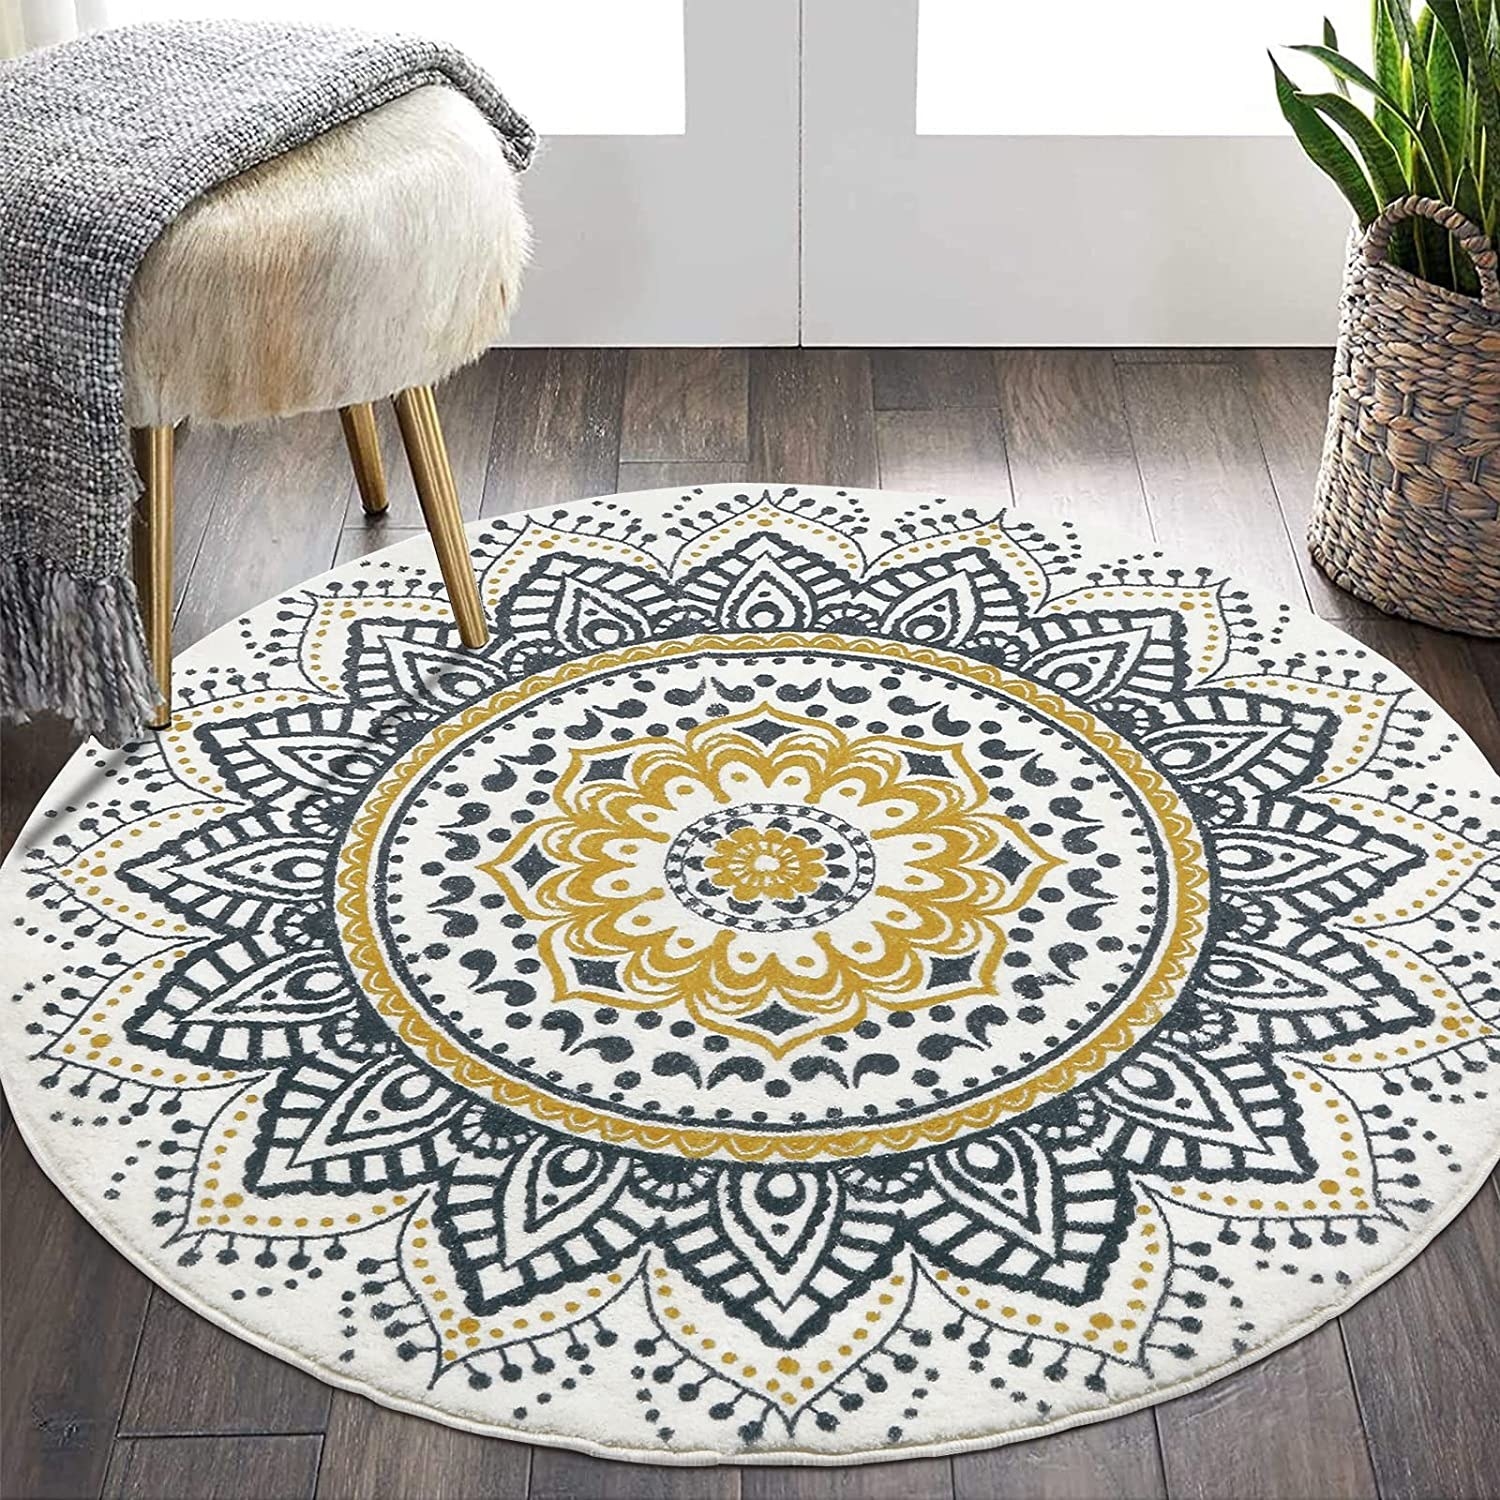 A round area rug with a mandala pattern